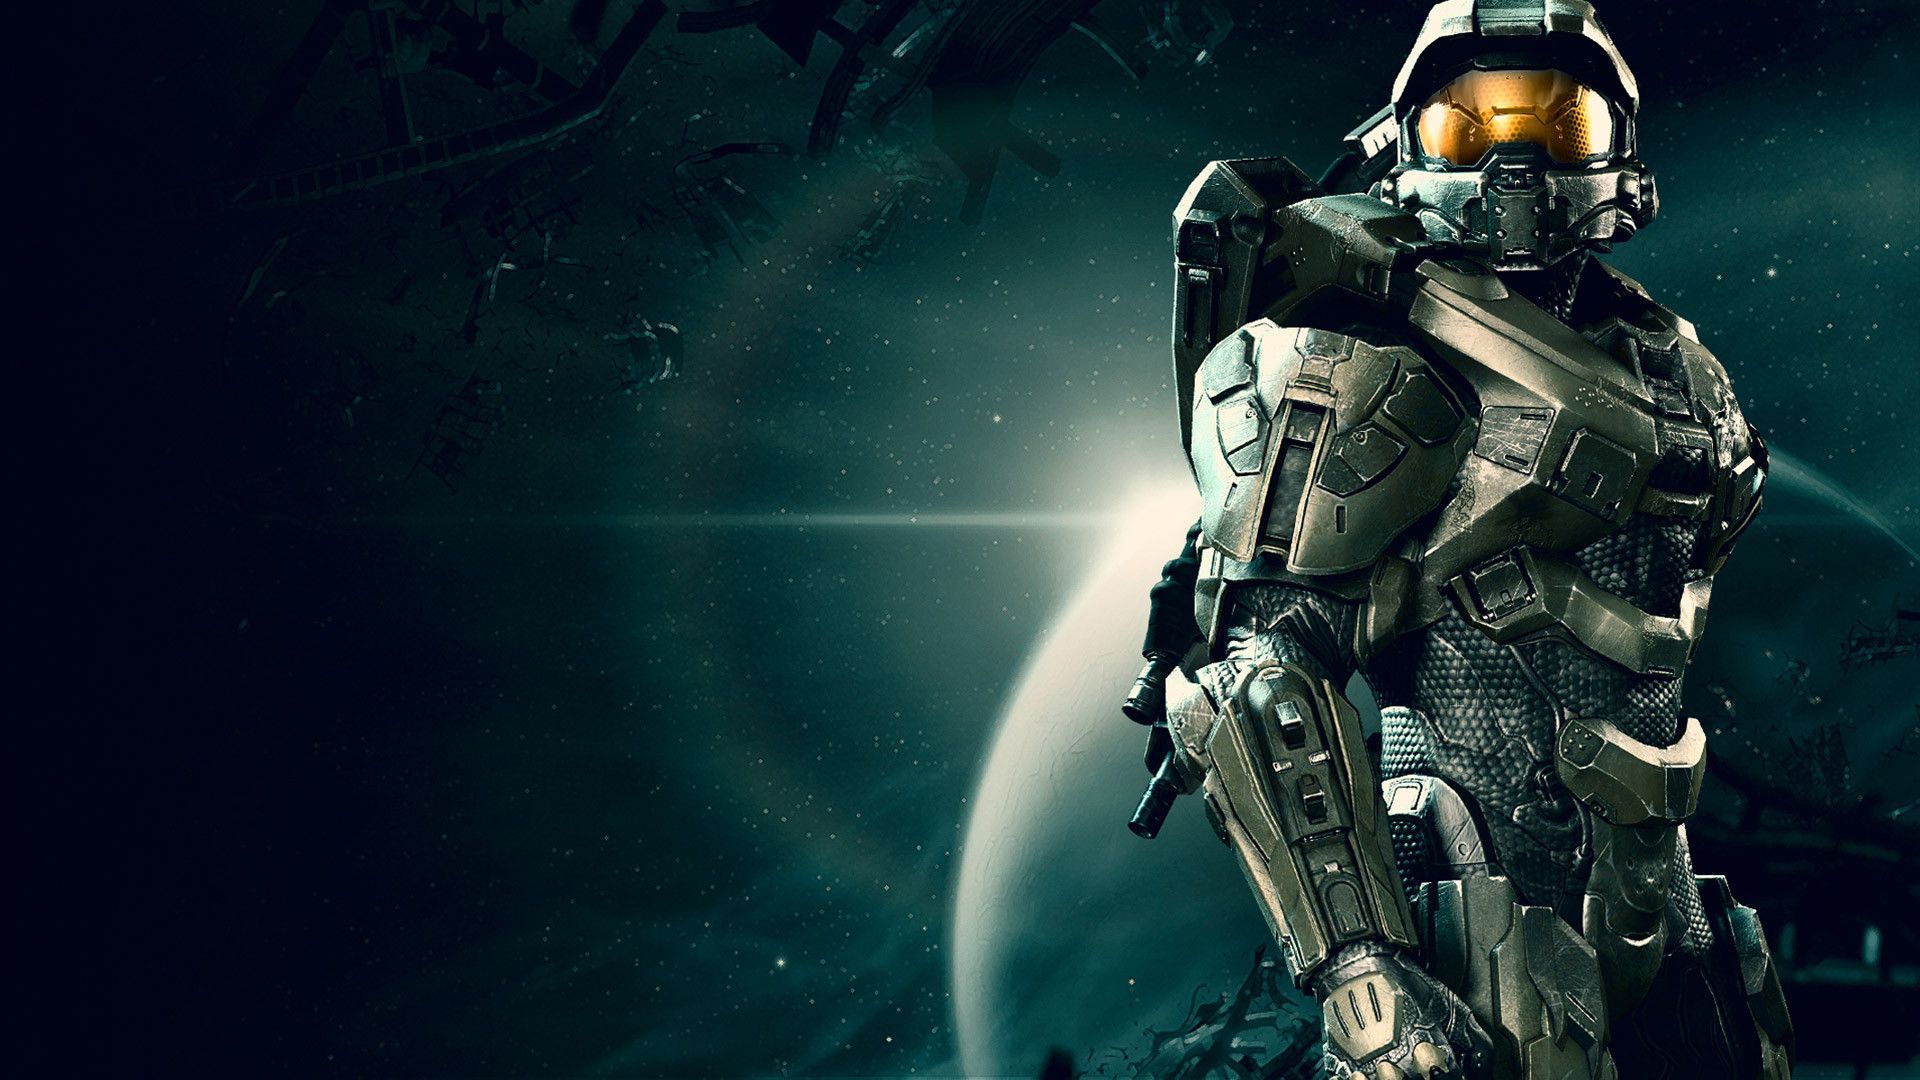 Geek Wallpaper. Master chief, Game picture, Chiefs wallpaper